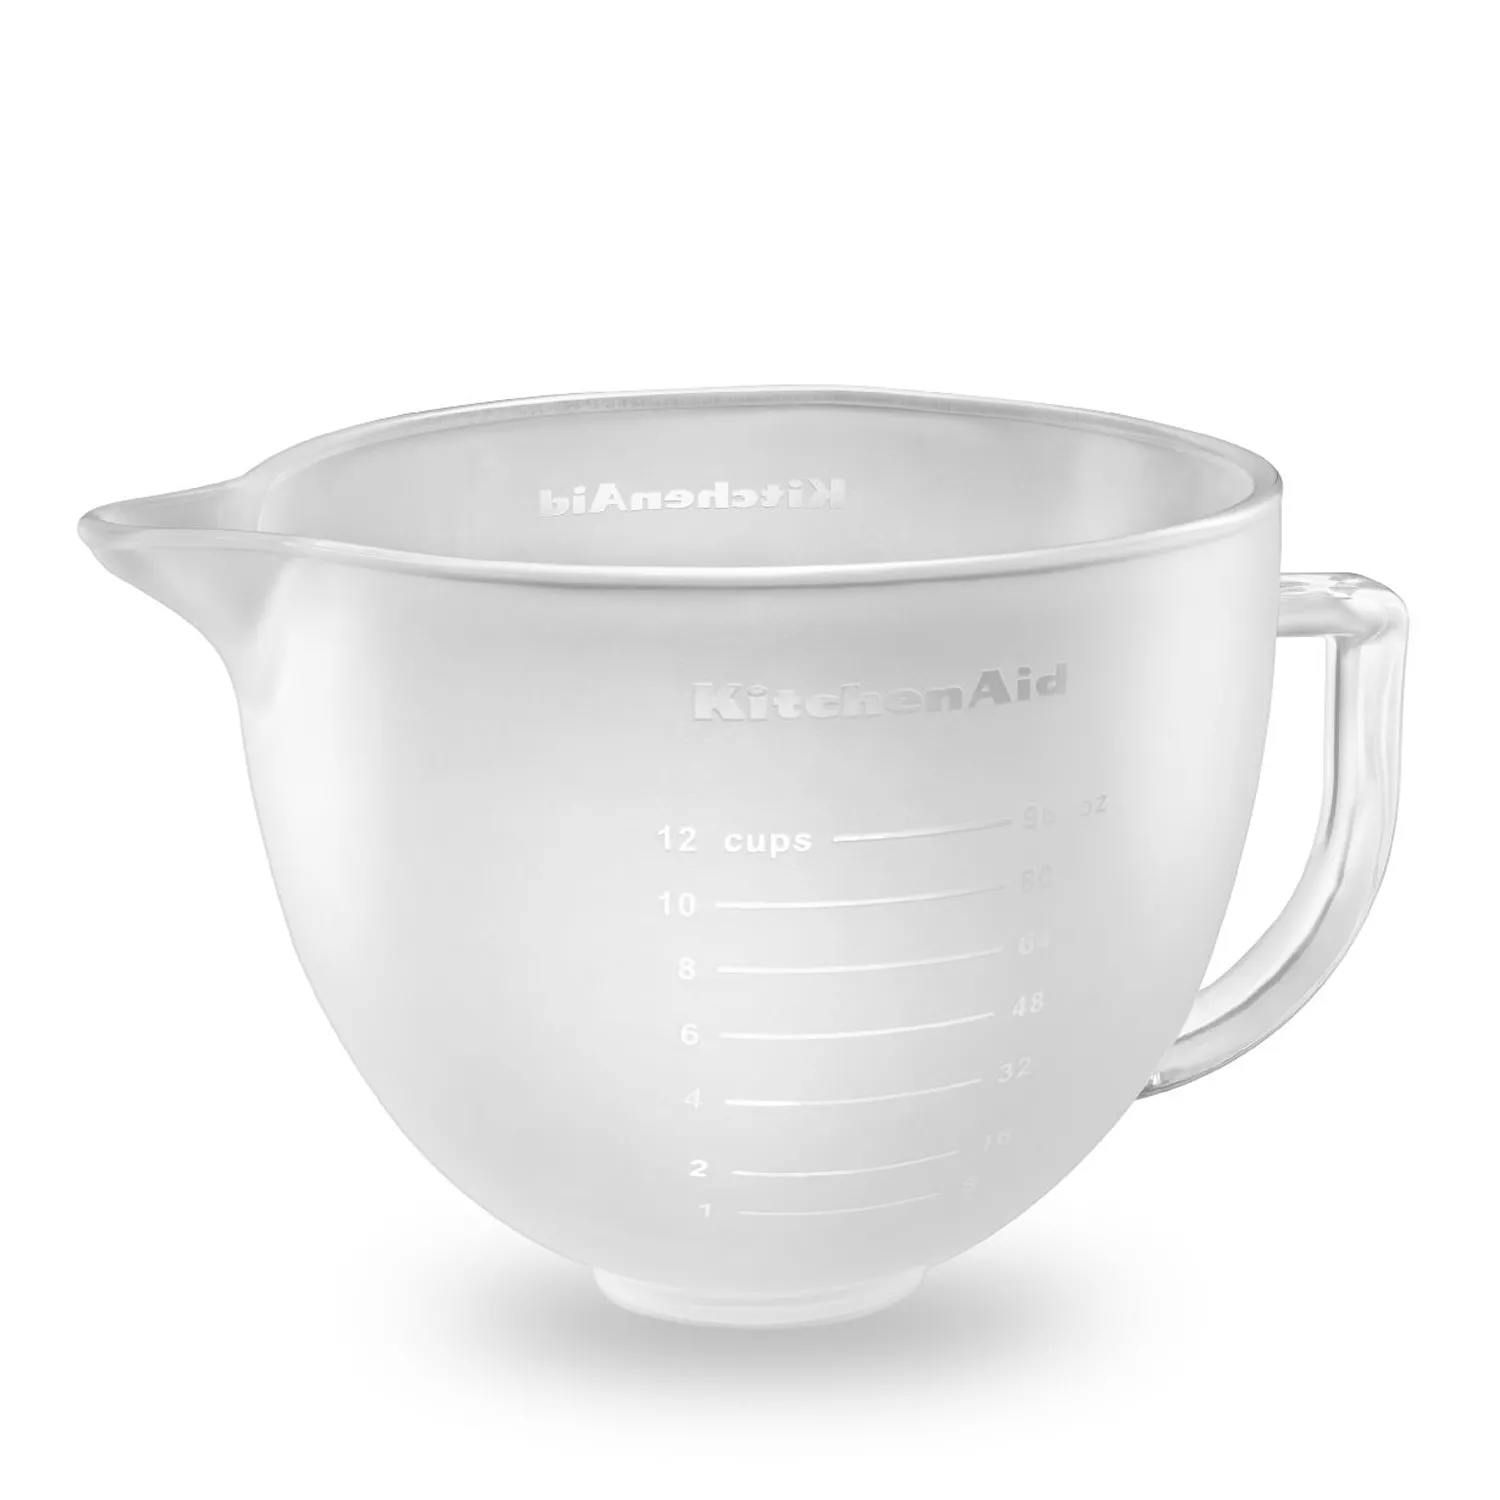 KitchenAid K5GBF 5-Quart Glass Mixing Bowl Frosted  - Best Buy